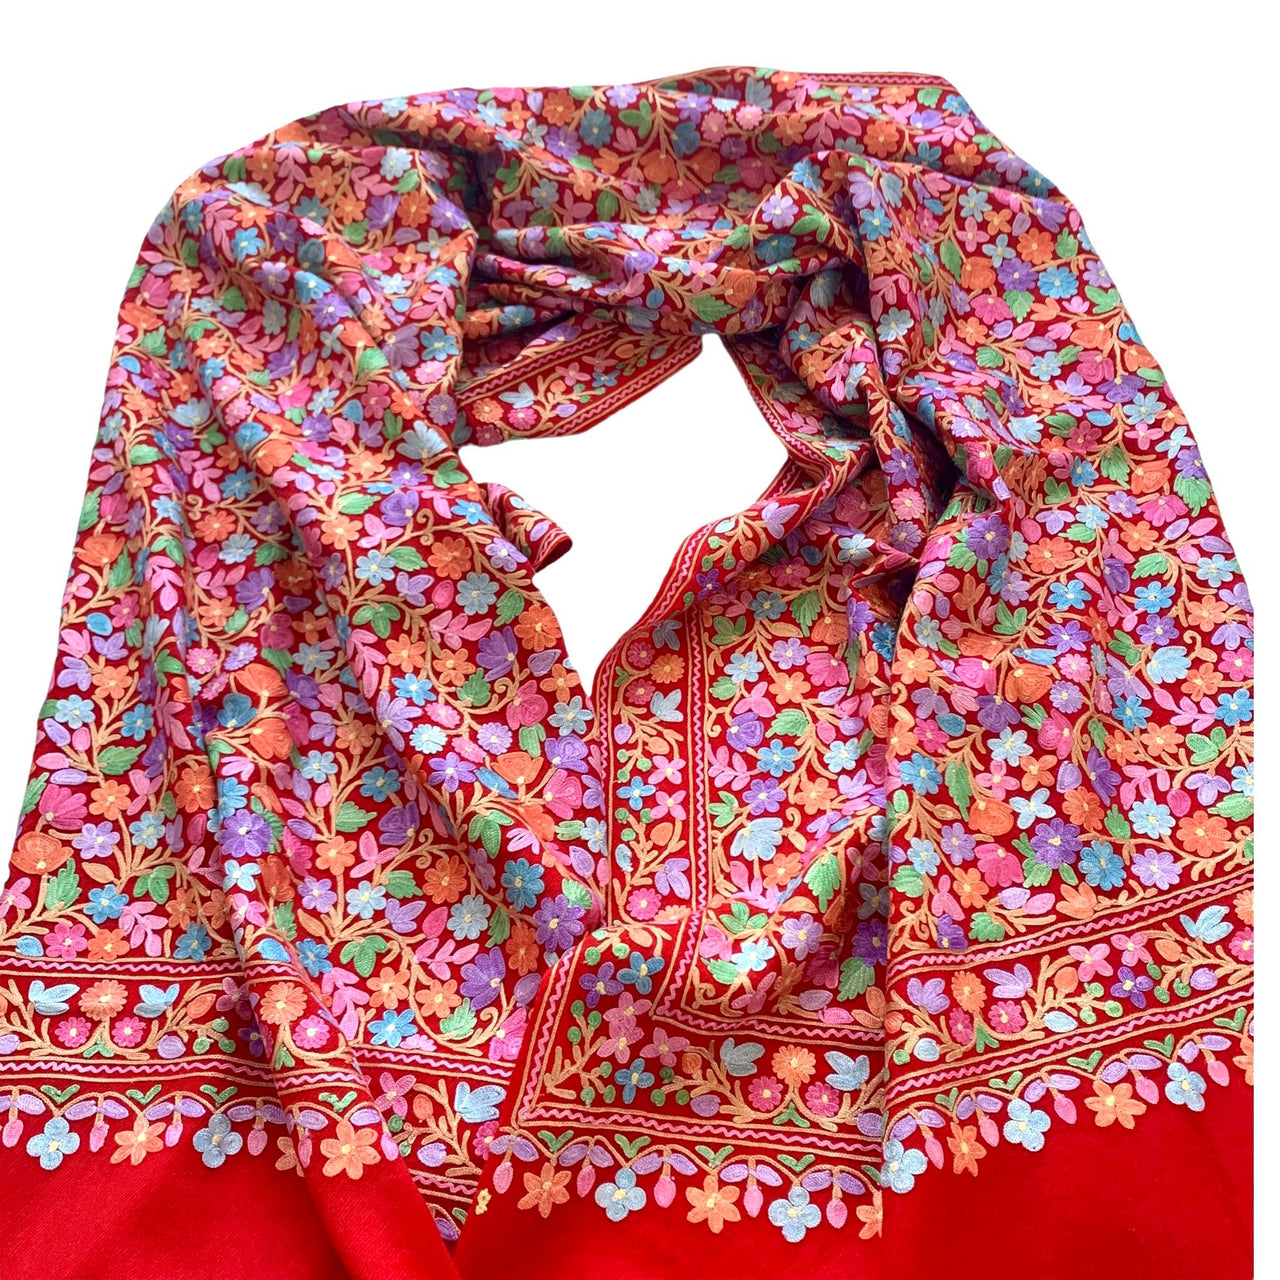 Stunning Red Floral Embroidered Scarf Shawl wrap Stole